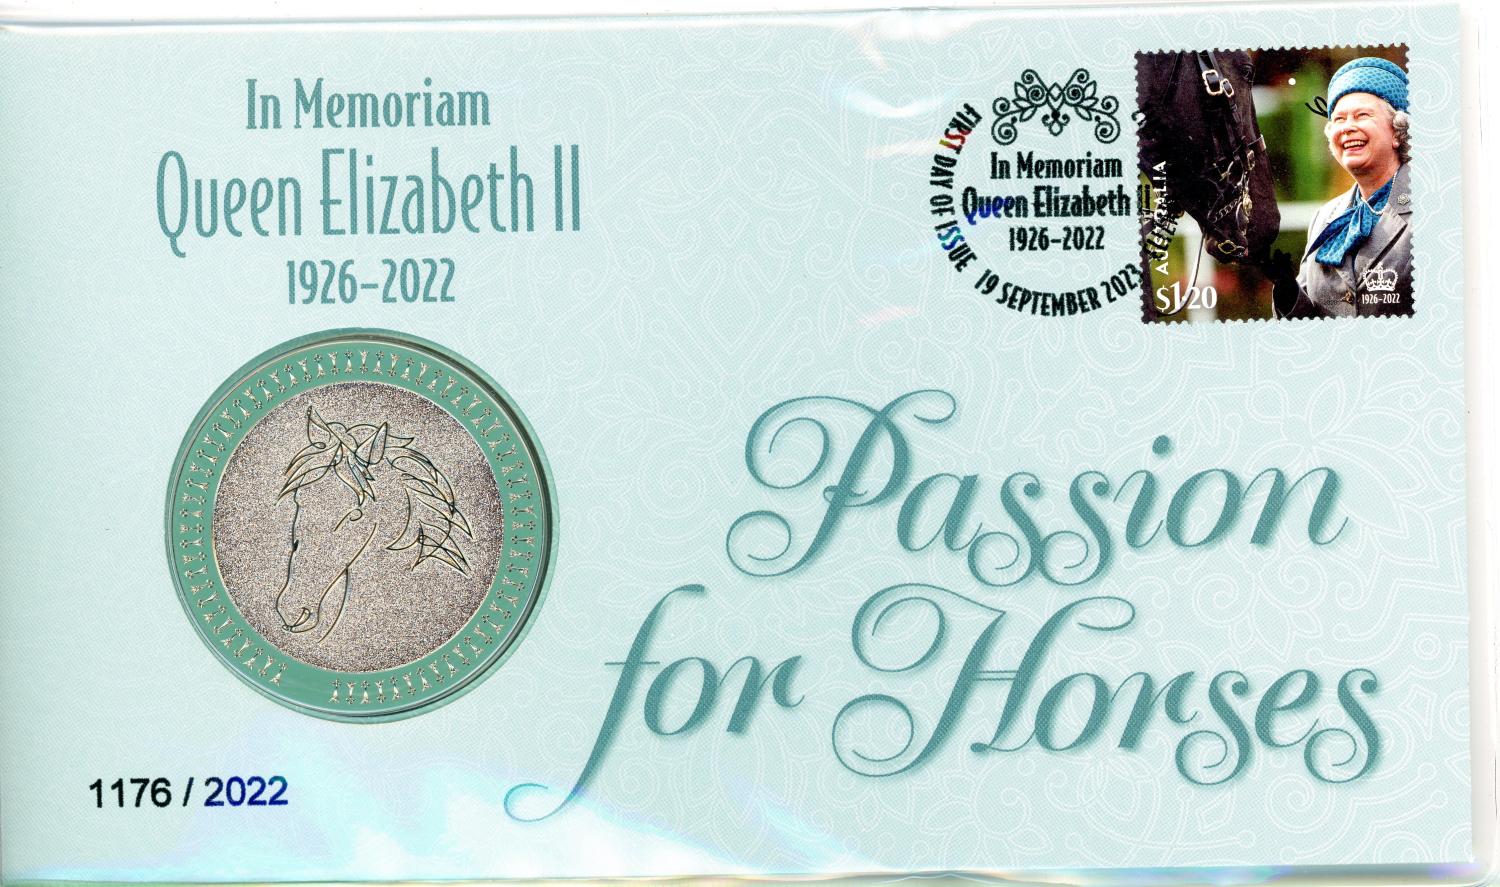 Thumbnail for 2023 In Memoriam Queen Elizabth II 1926-2022 Passion for Horses Postal Medallion Cover